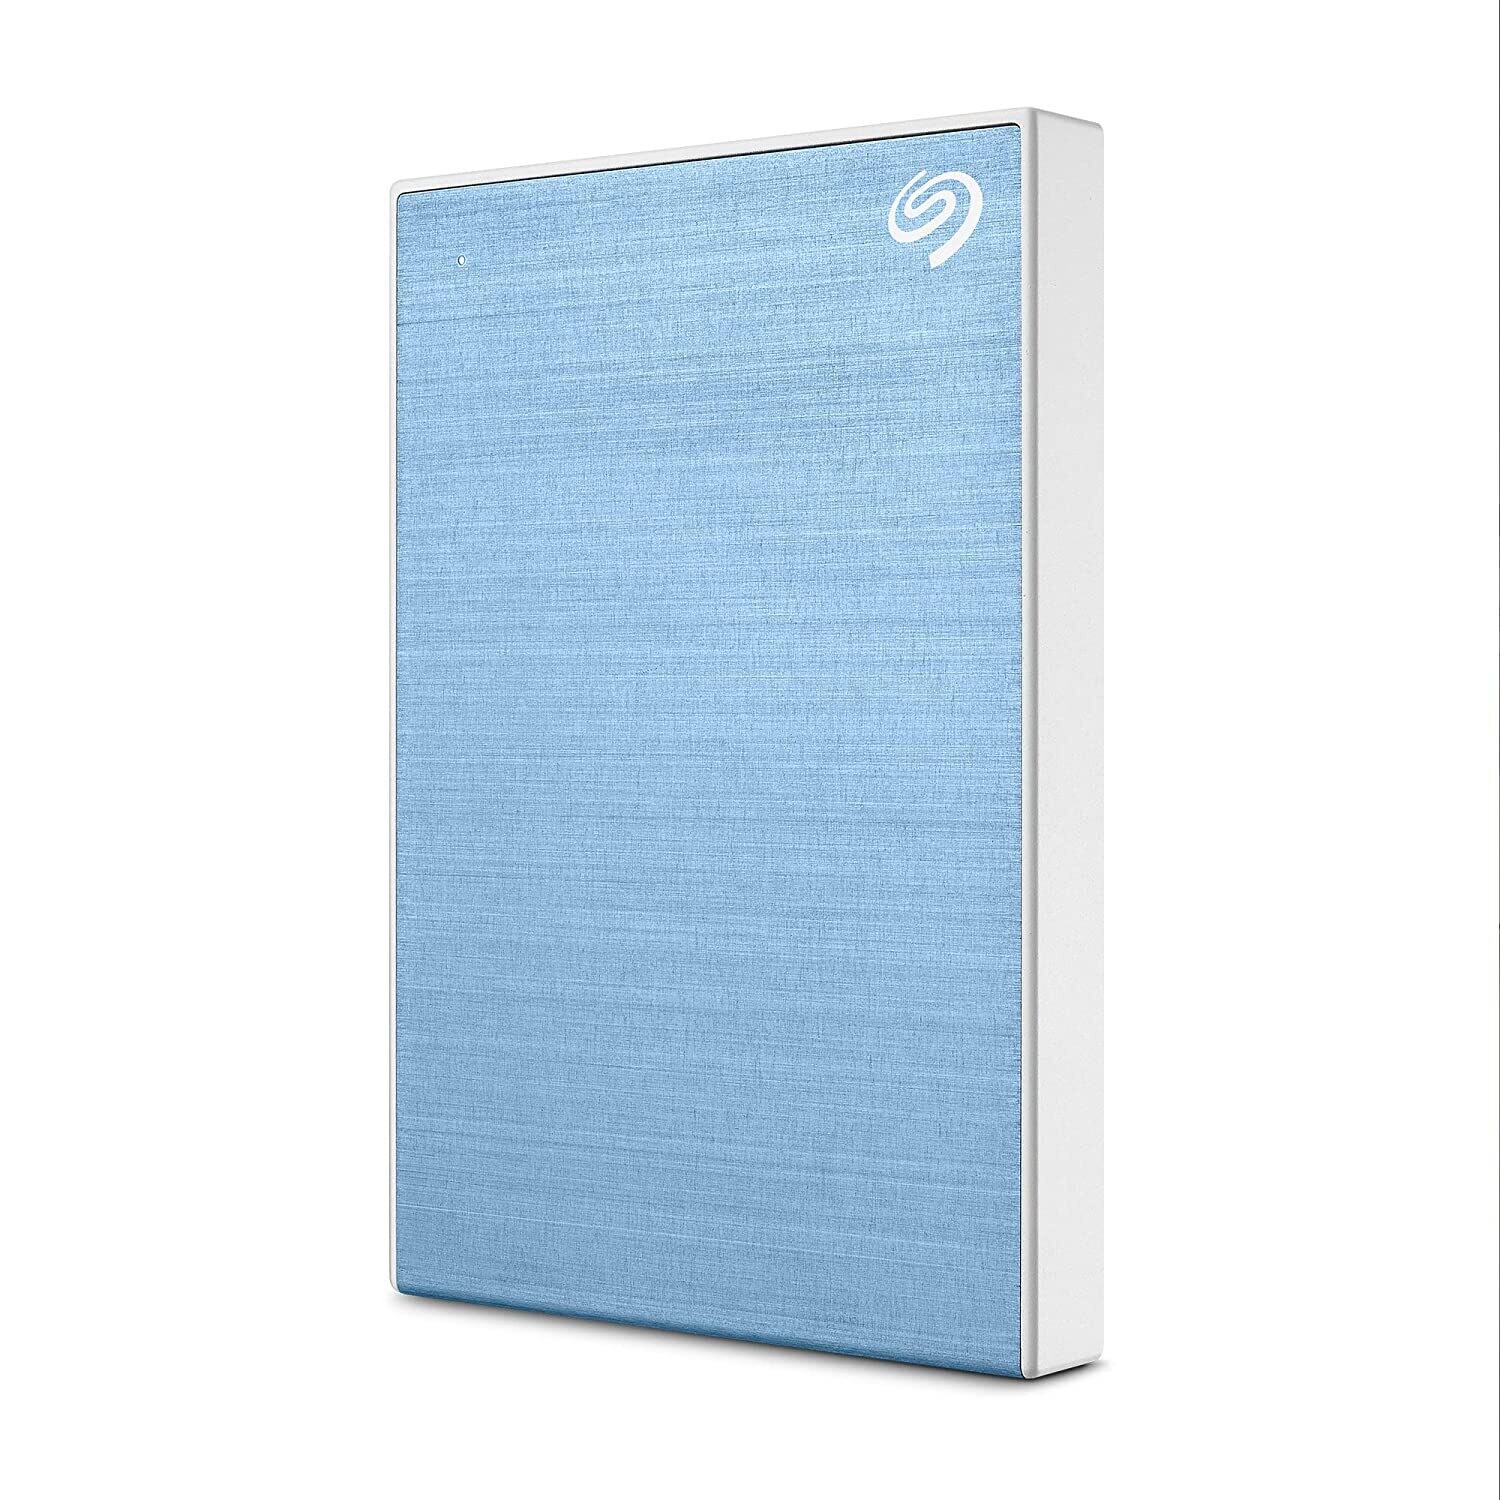 Seagate One Touch 1TB External HDD with Password Protection, Light Blue